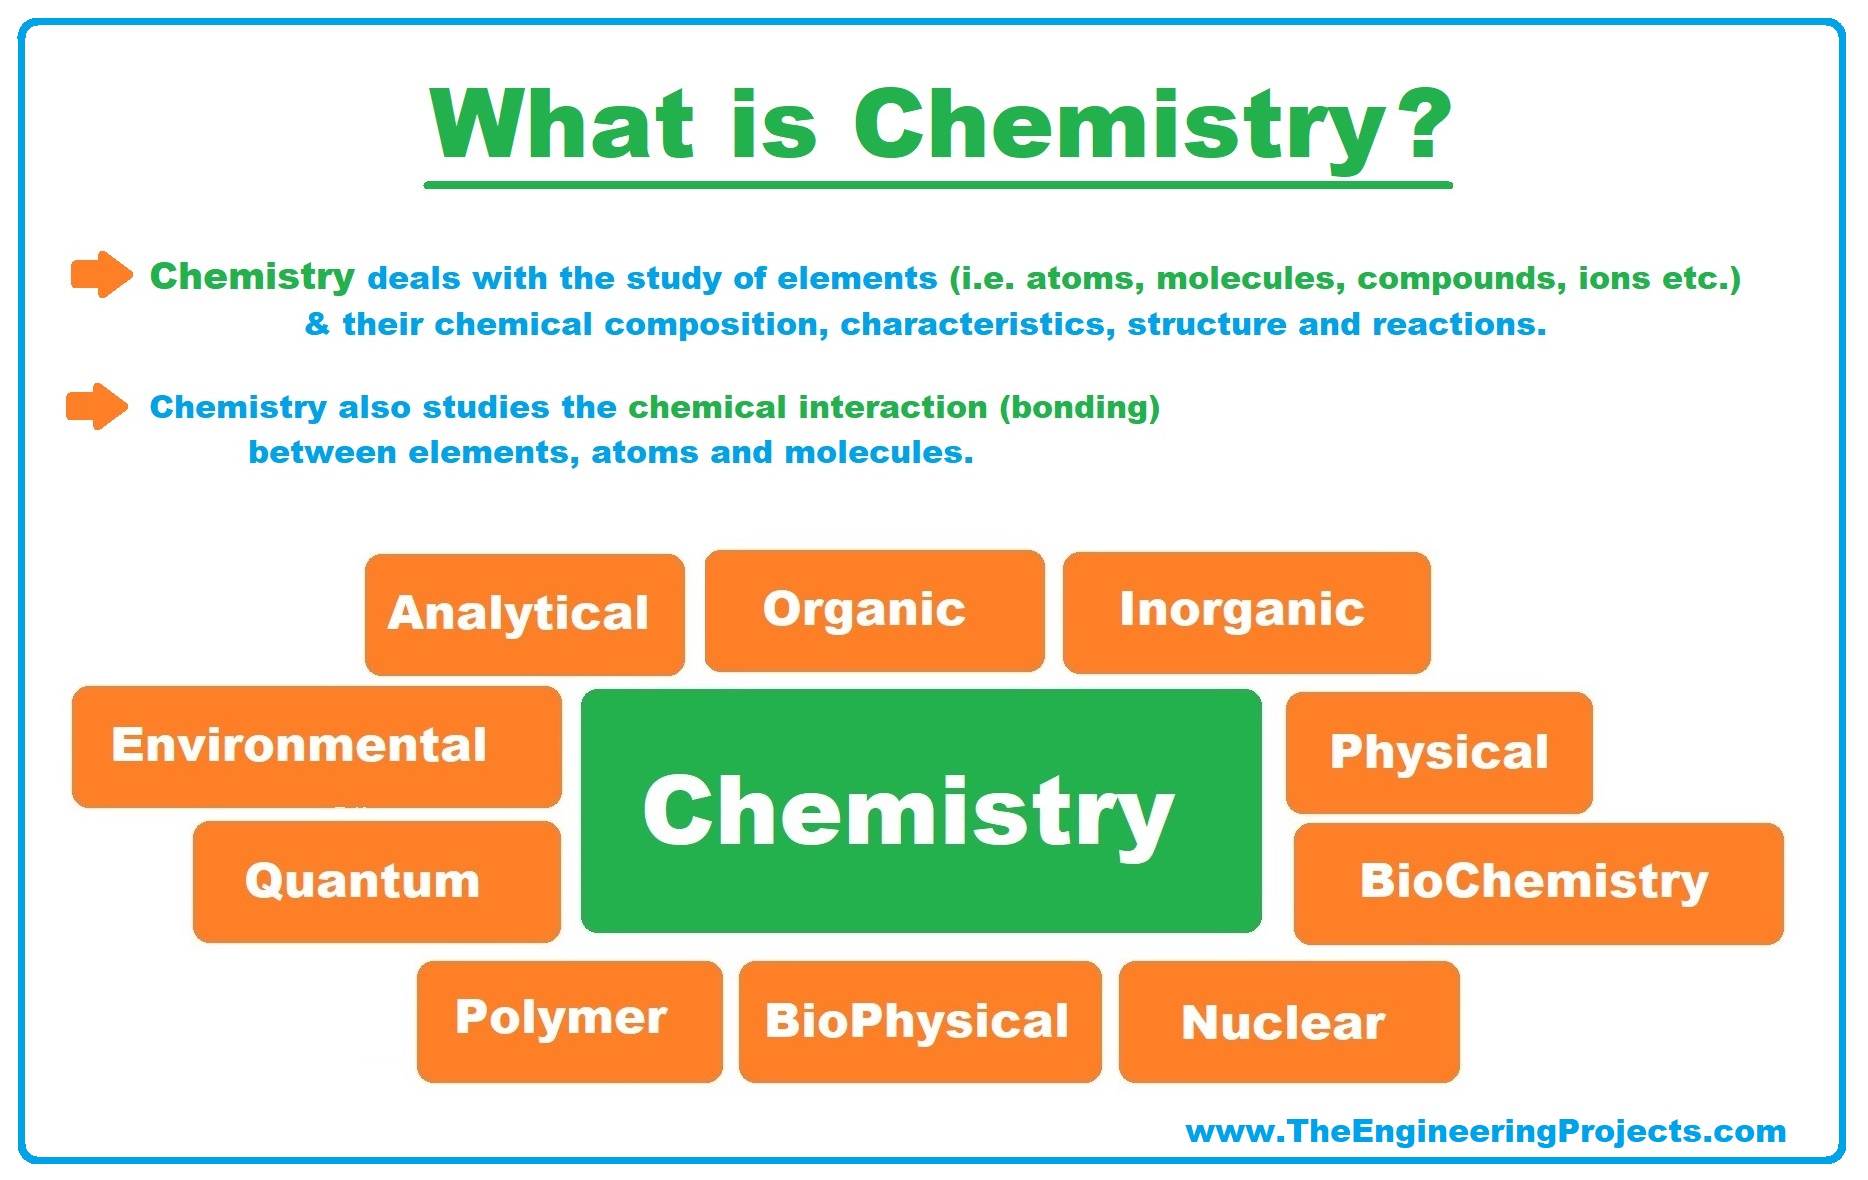 What is Chemistry? Definition, Branches, Books and Scientists - The ...